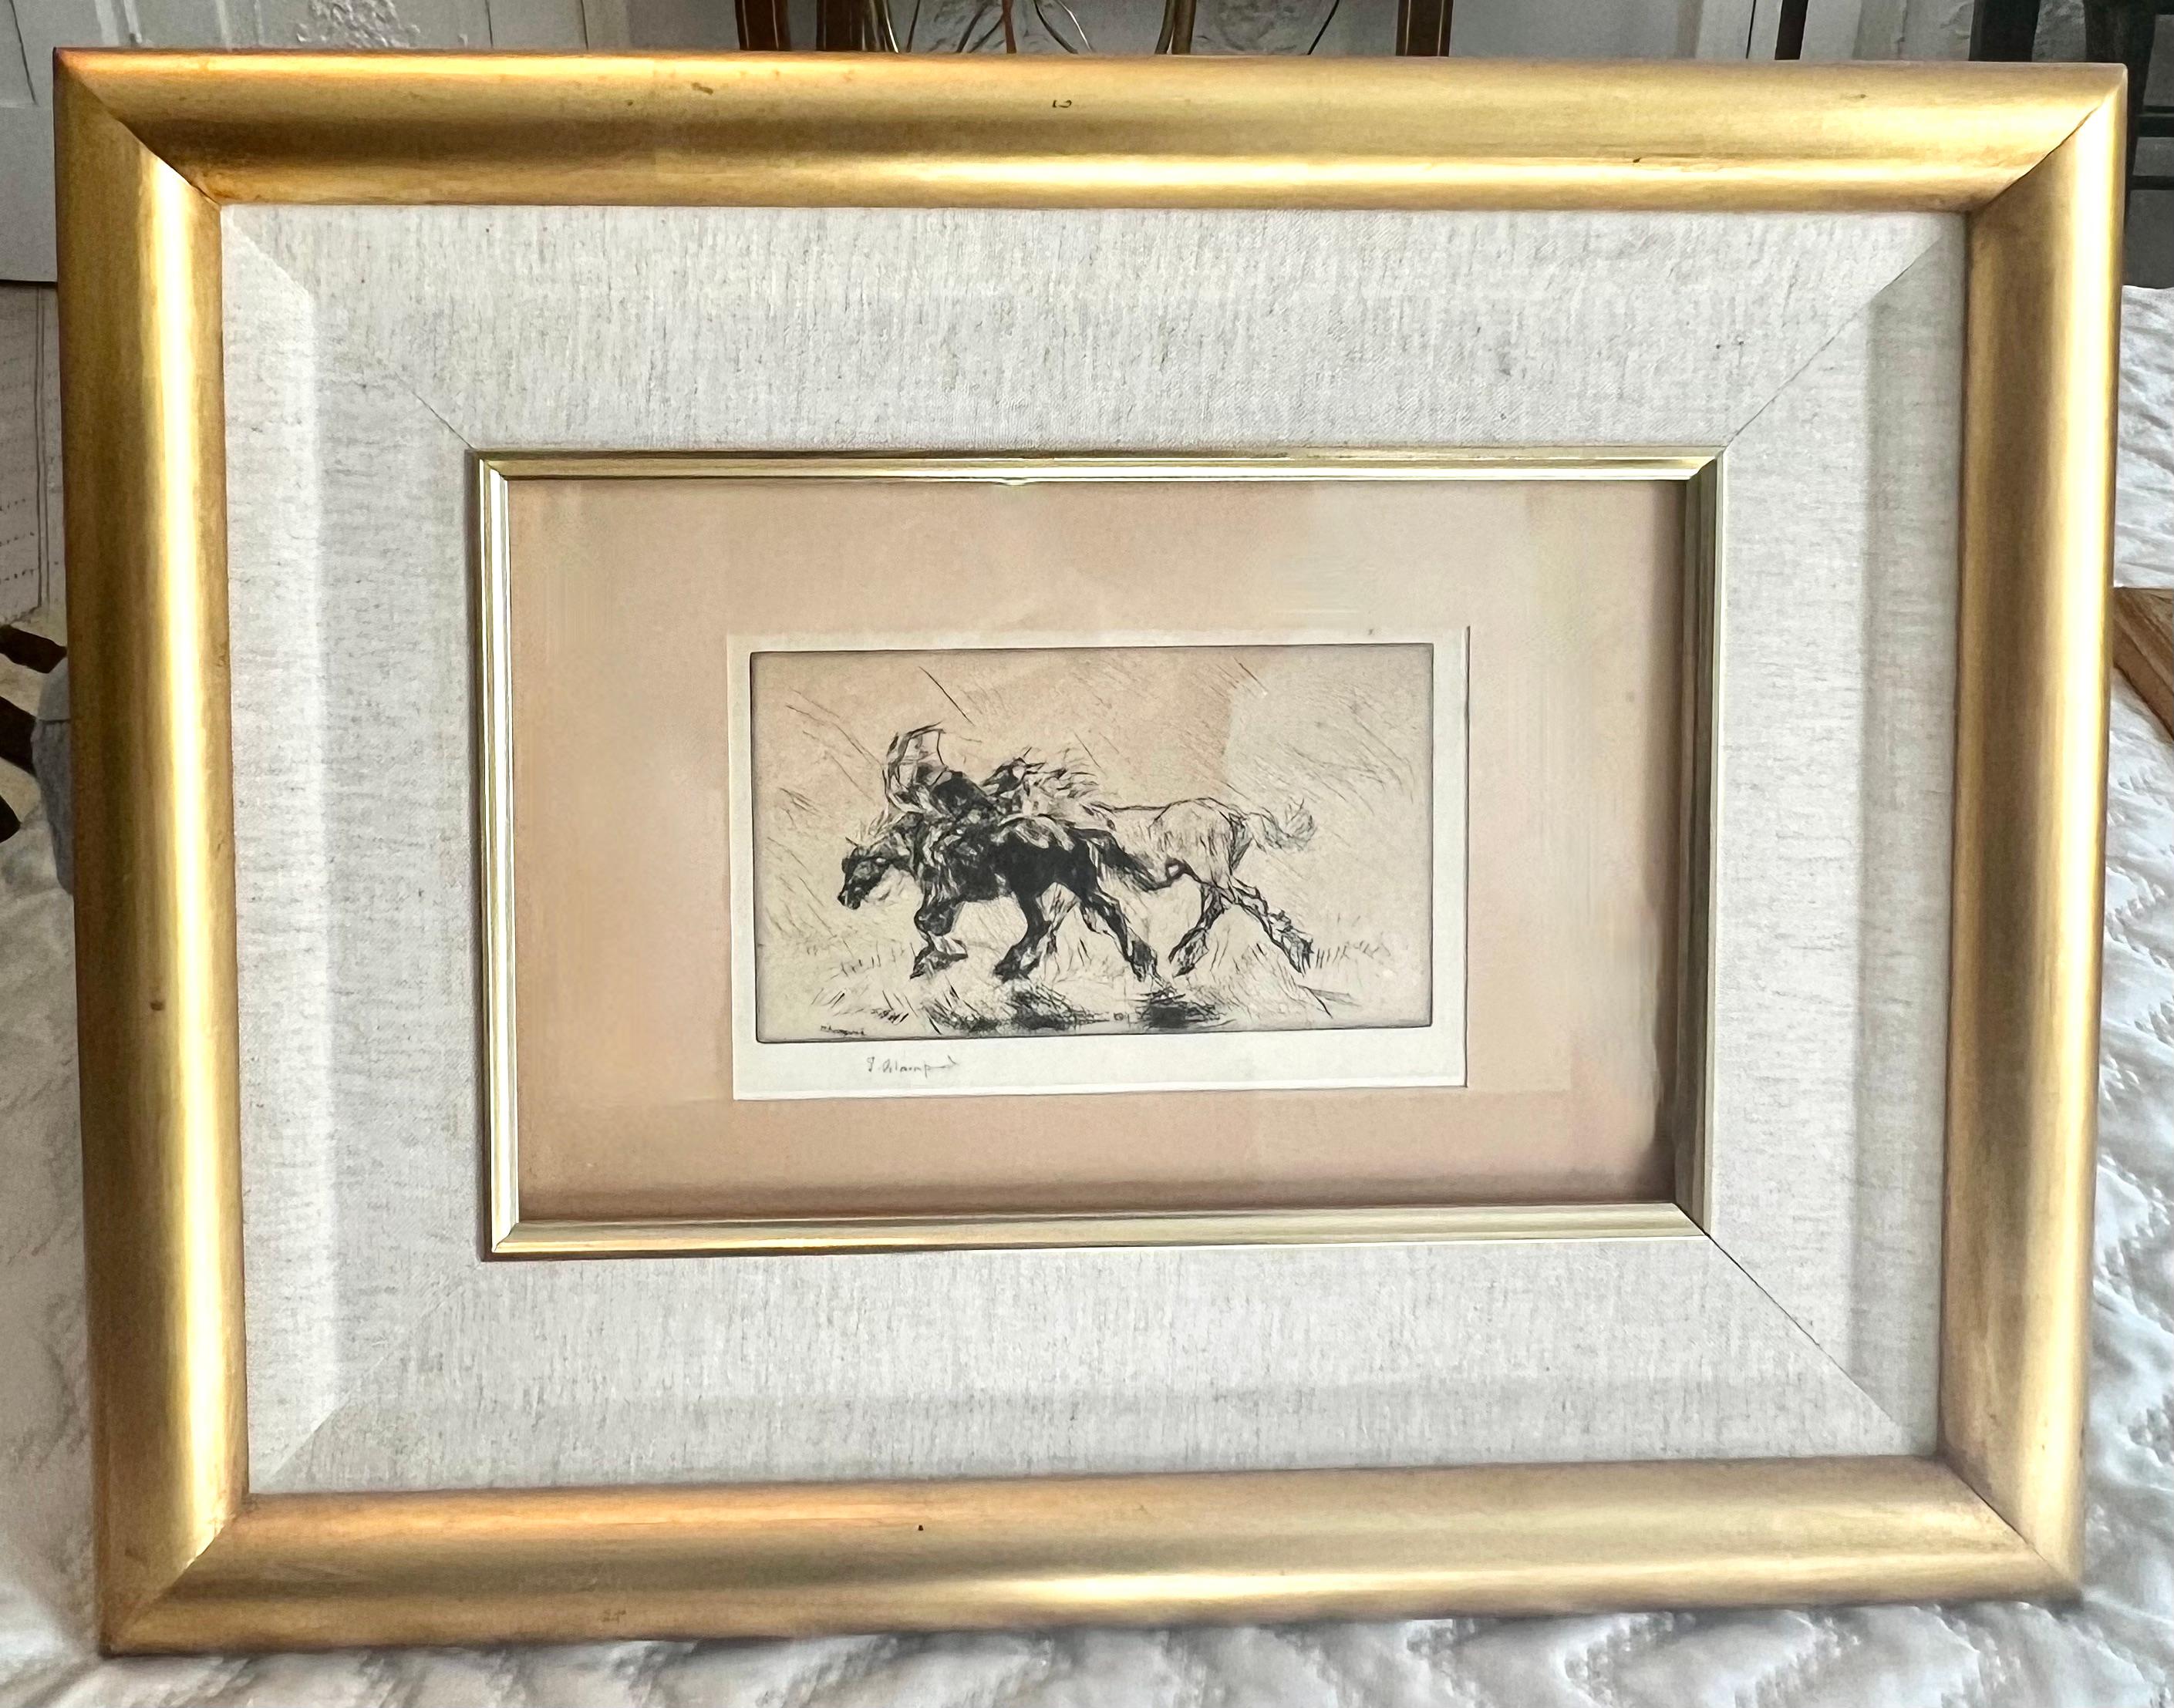  	Edmund Blampied Pen Drawing of a Horse Matted and Framed in Gilt Frame For Sale 2